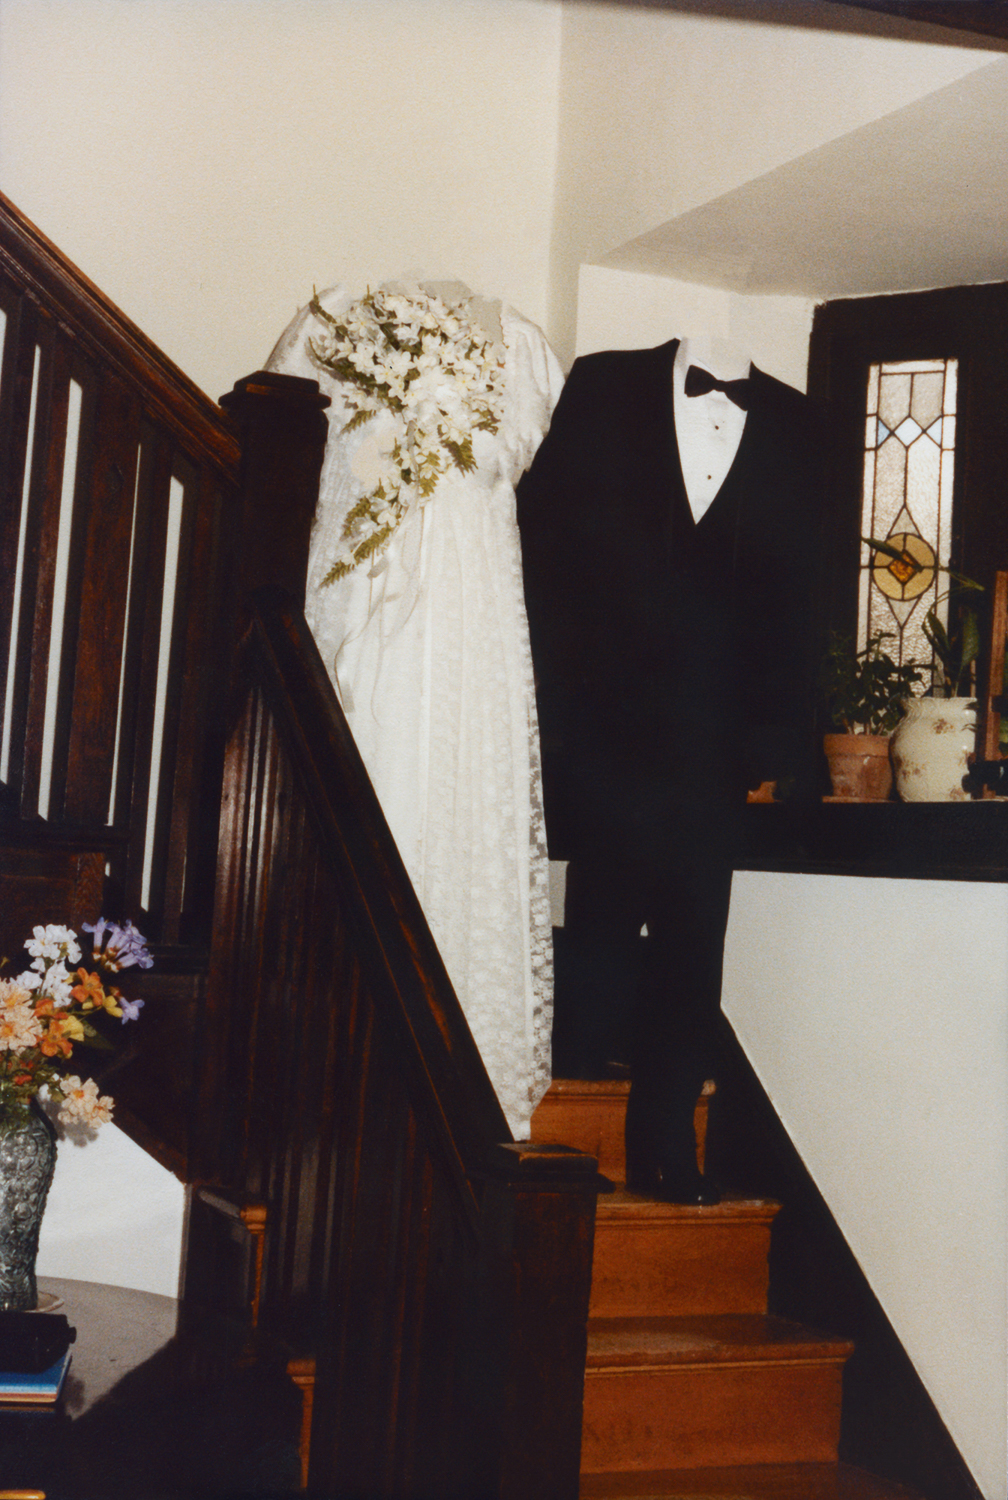 A bride and groom on stairs in a house with heads erased